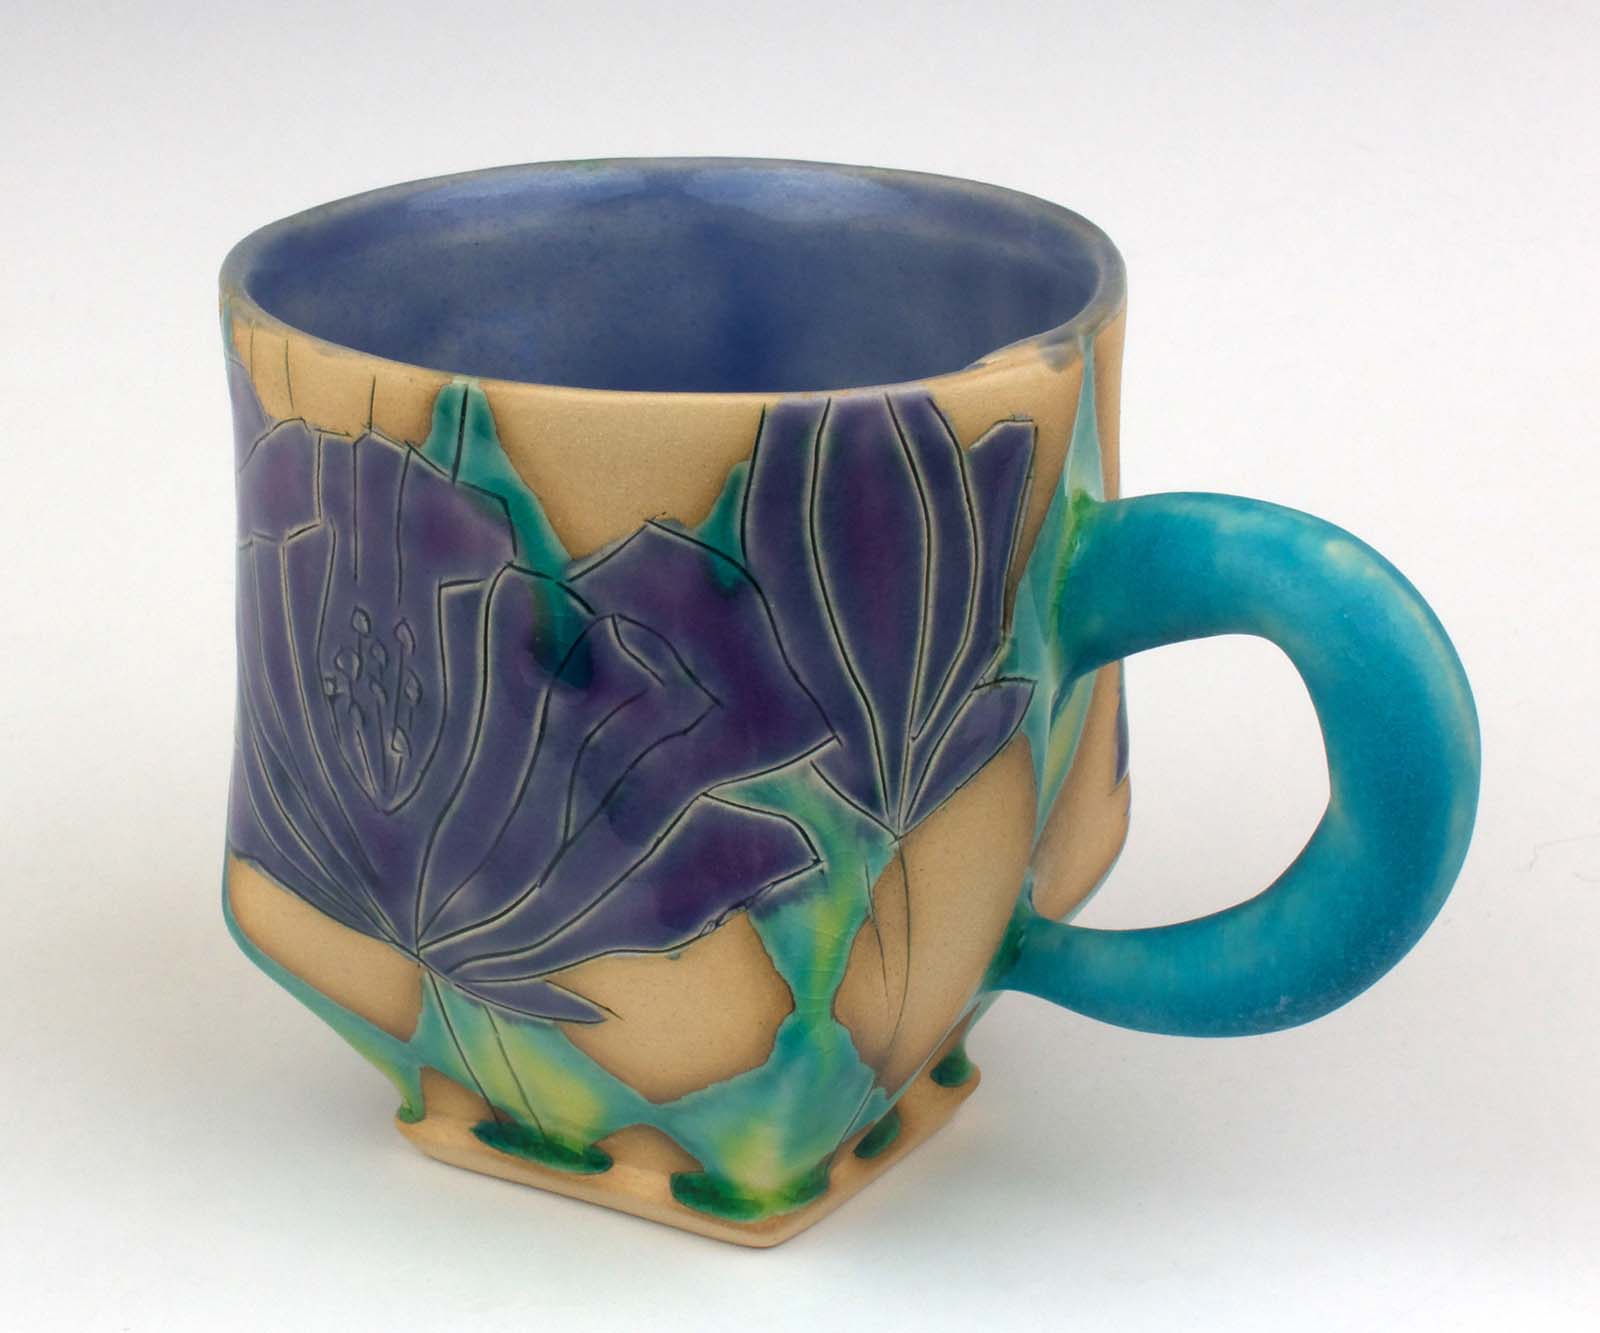 Shana Salaff, mug with purple poppies, 4.5 in. (11 cm) in height, porcelaneous stoneware, fired to cone 5 in oxidation, 2021.